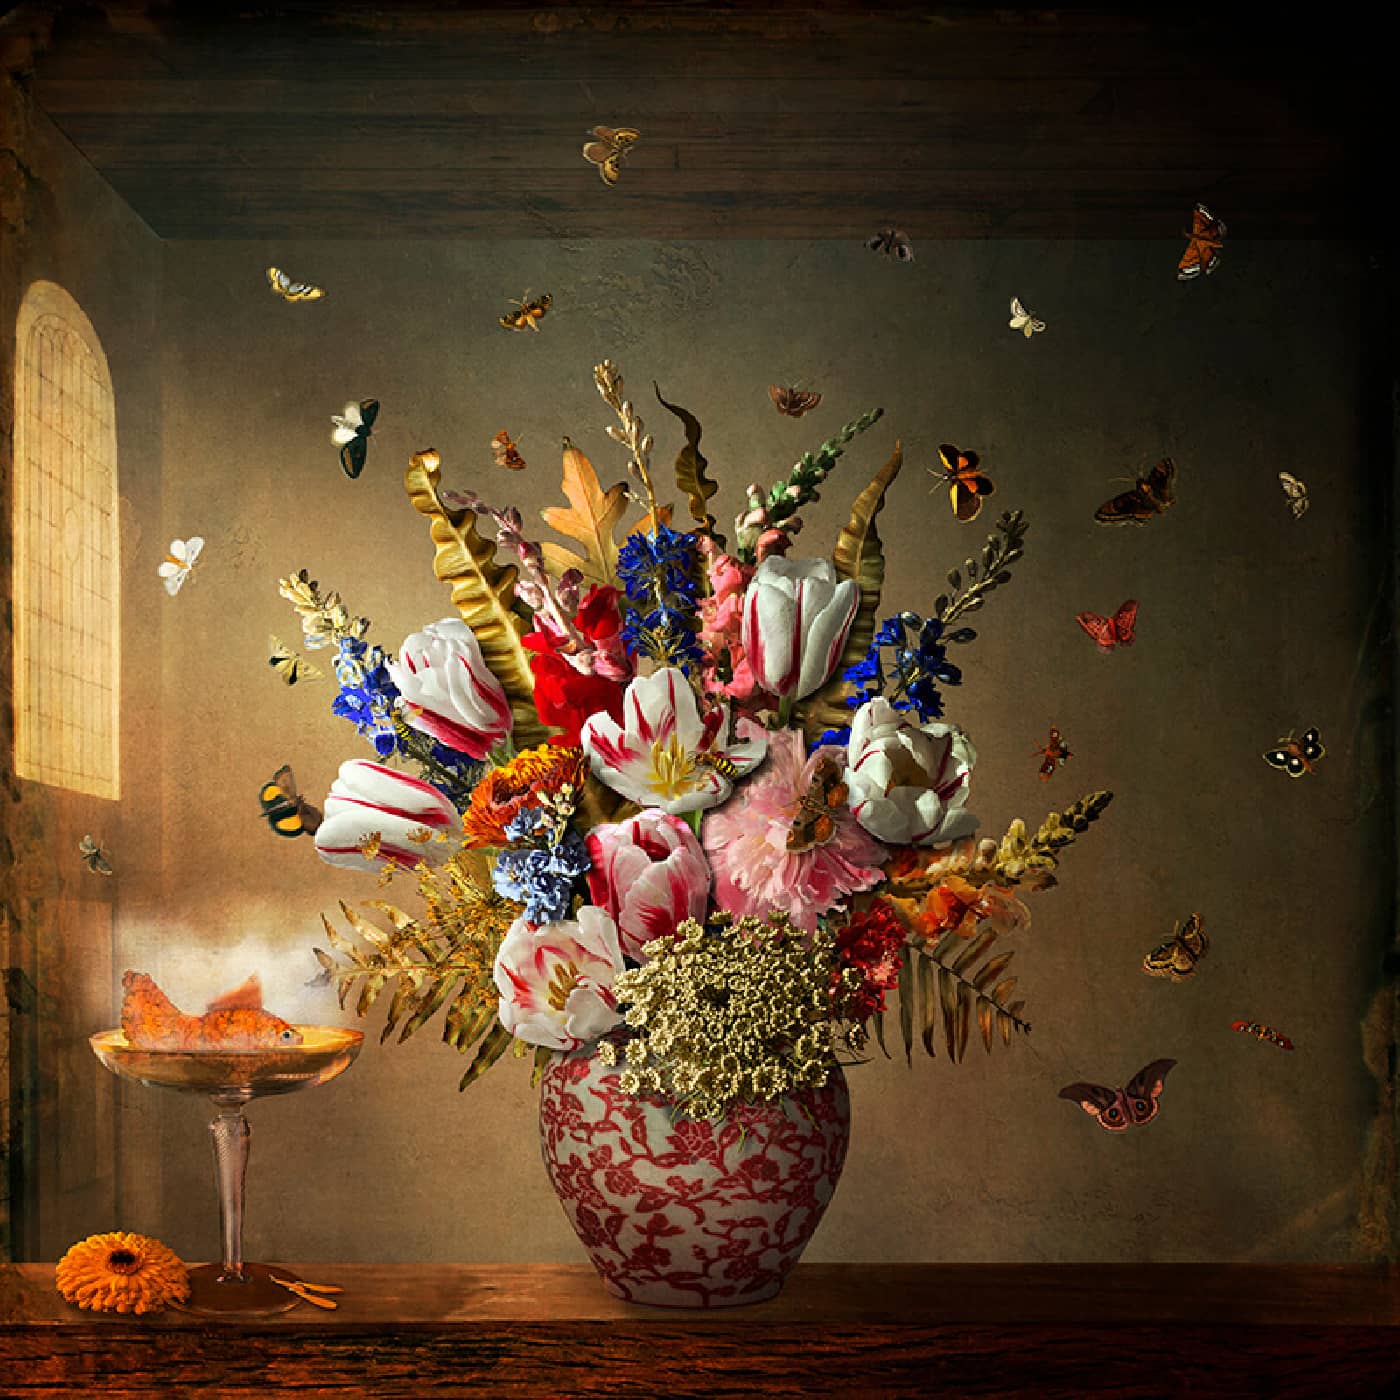 USA-Based Composite Photography Artist Maggie Taylor Photomontage ~ 'The Alchemist Chamber' - Curate Art & Design Gallery Sorrento Mornington Peninsula Melbourne